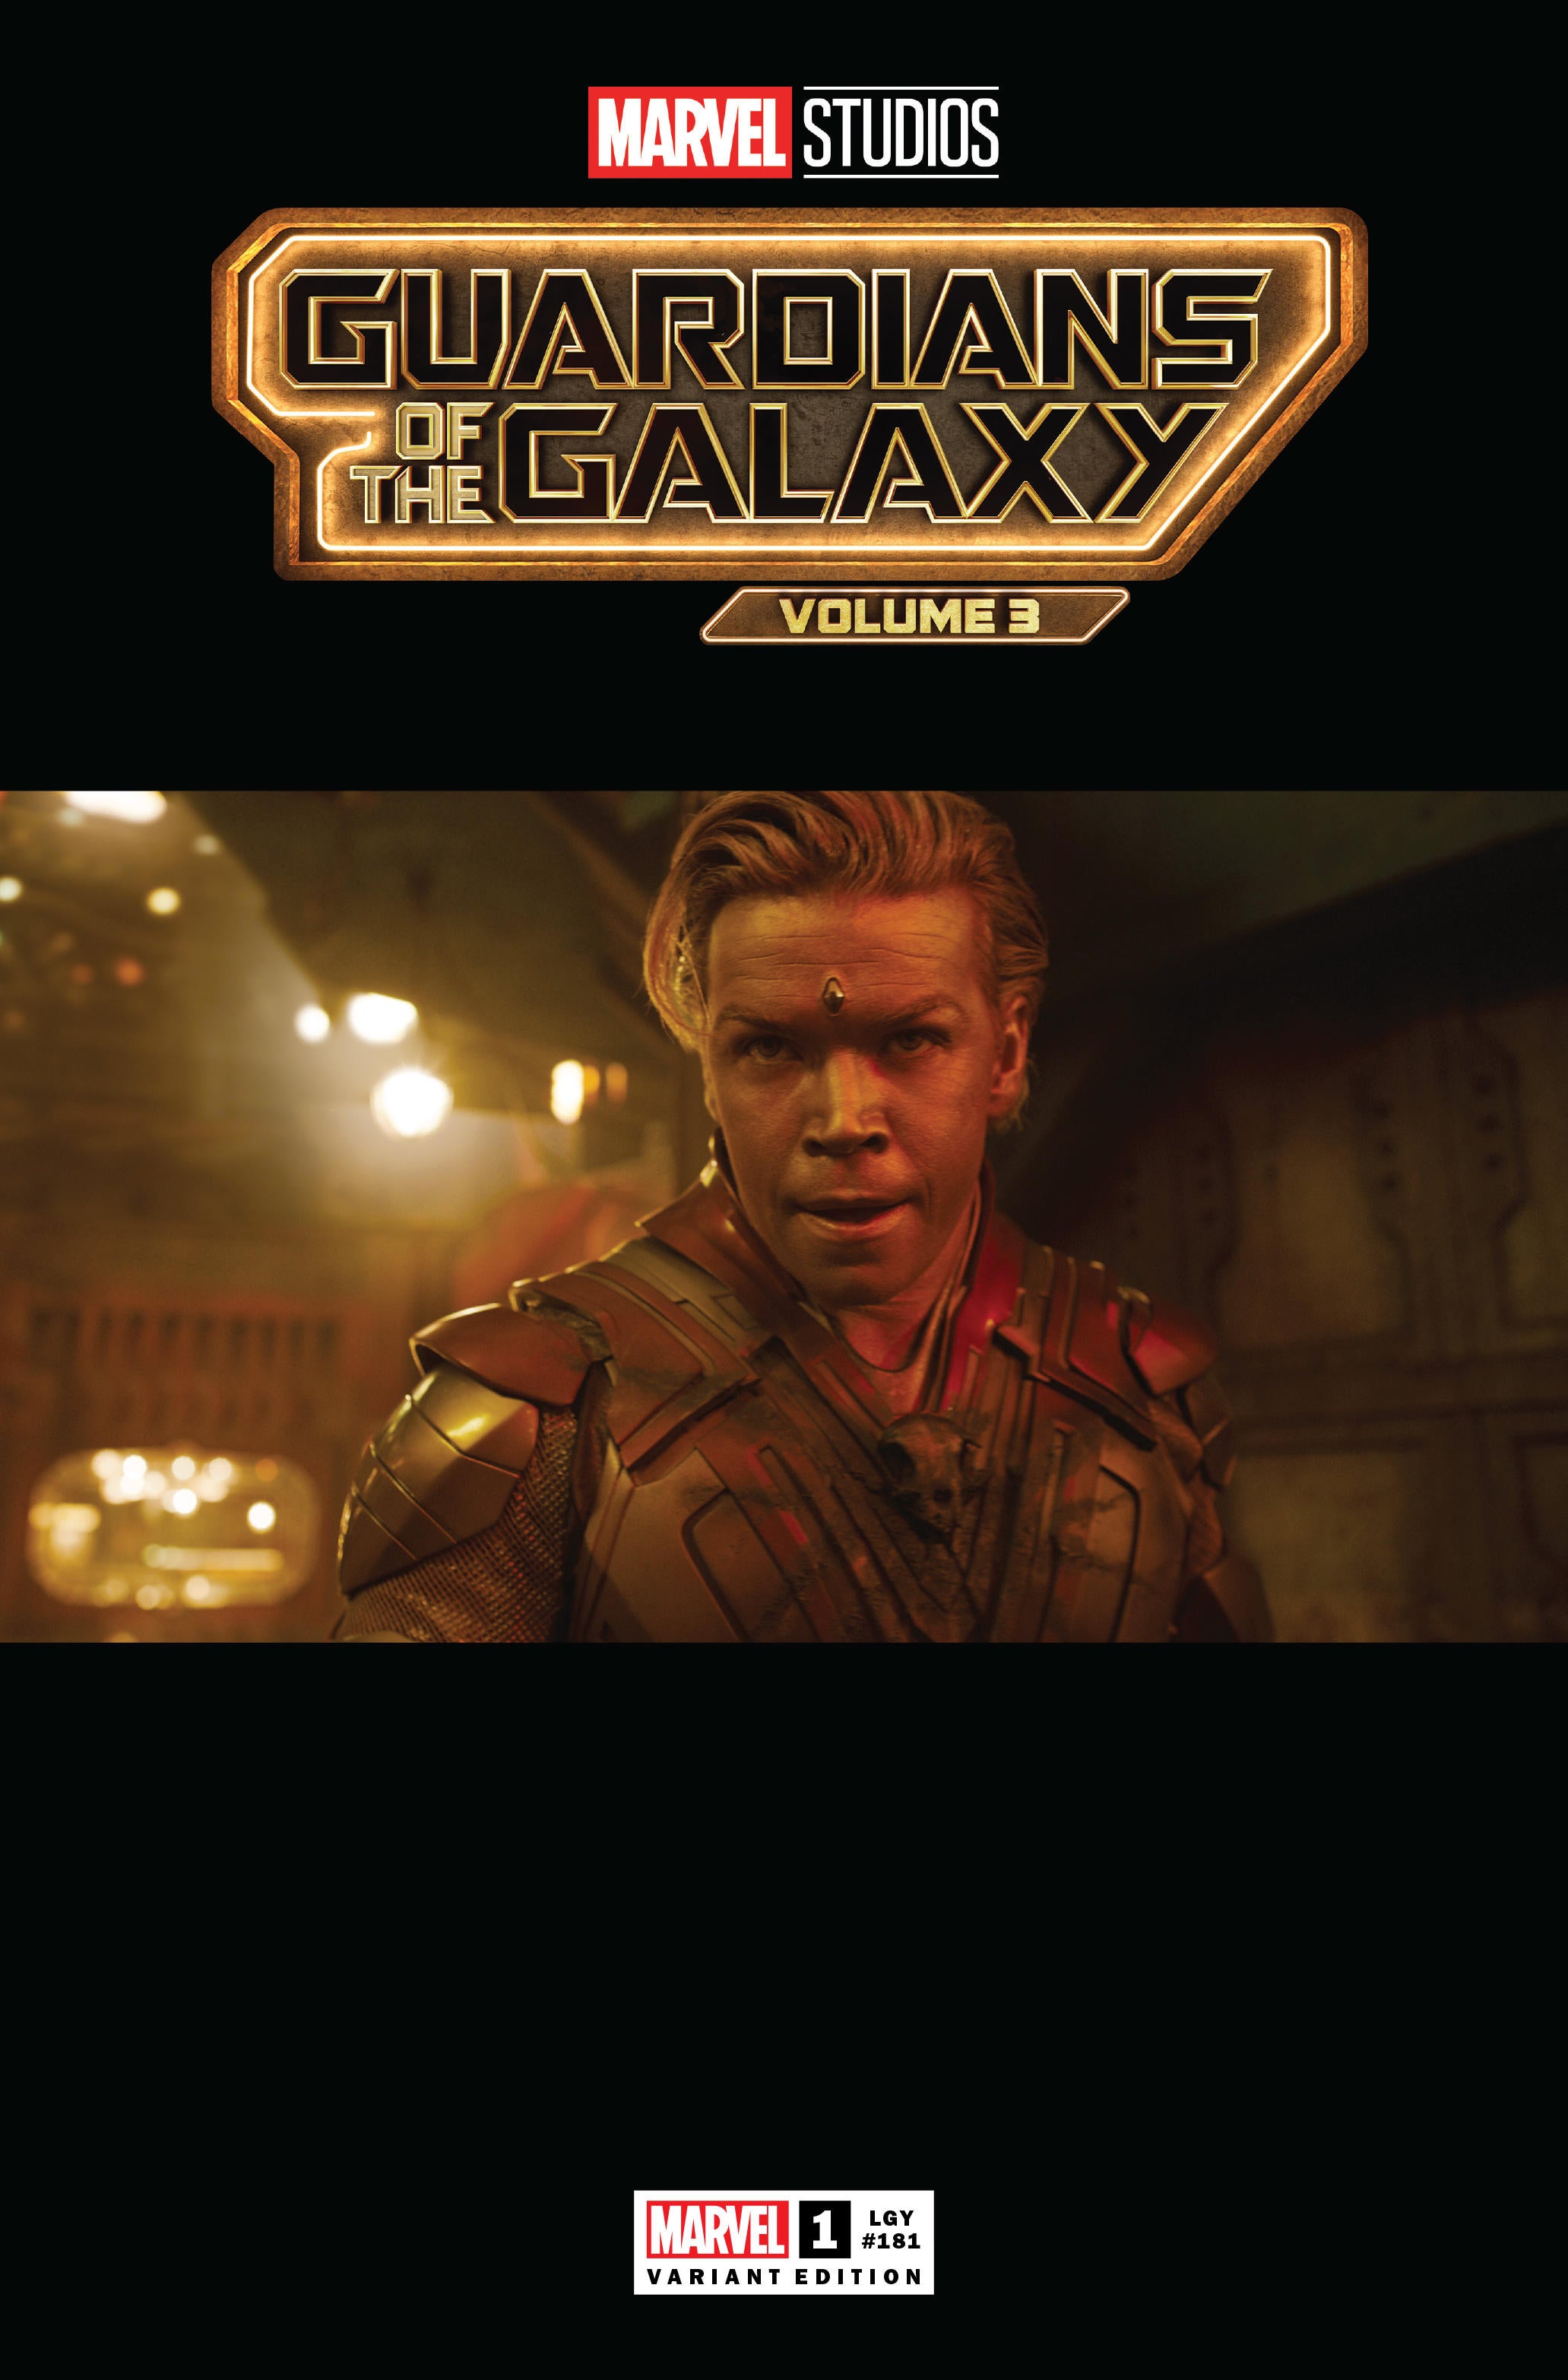 Guardians of the Galaxy Variant Cover Features Will Poulter’s Adam Warlock